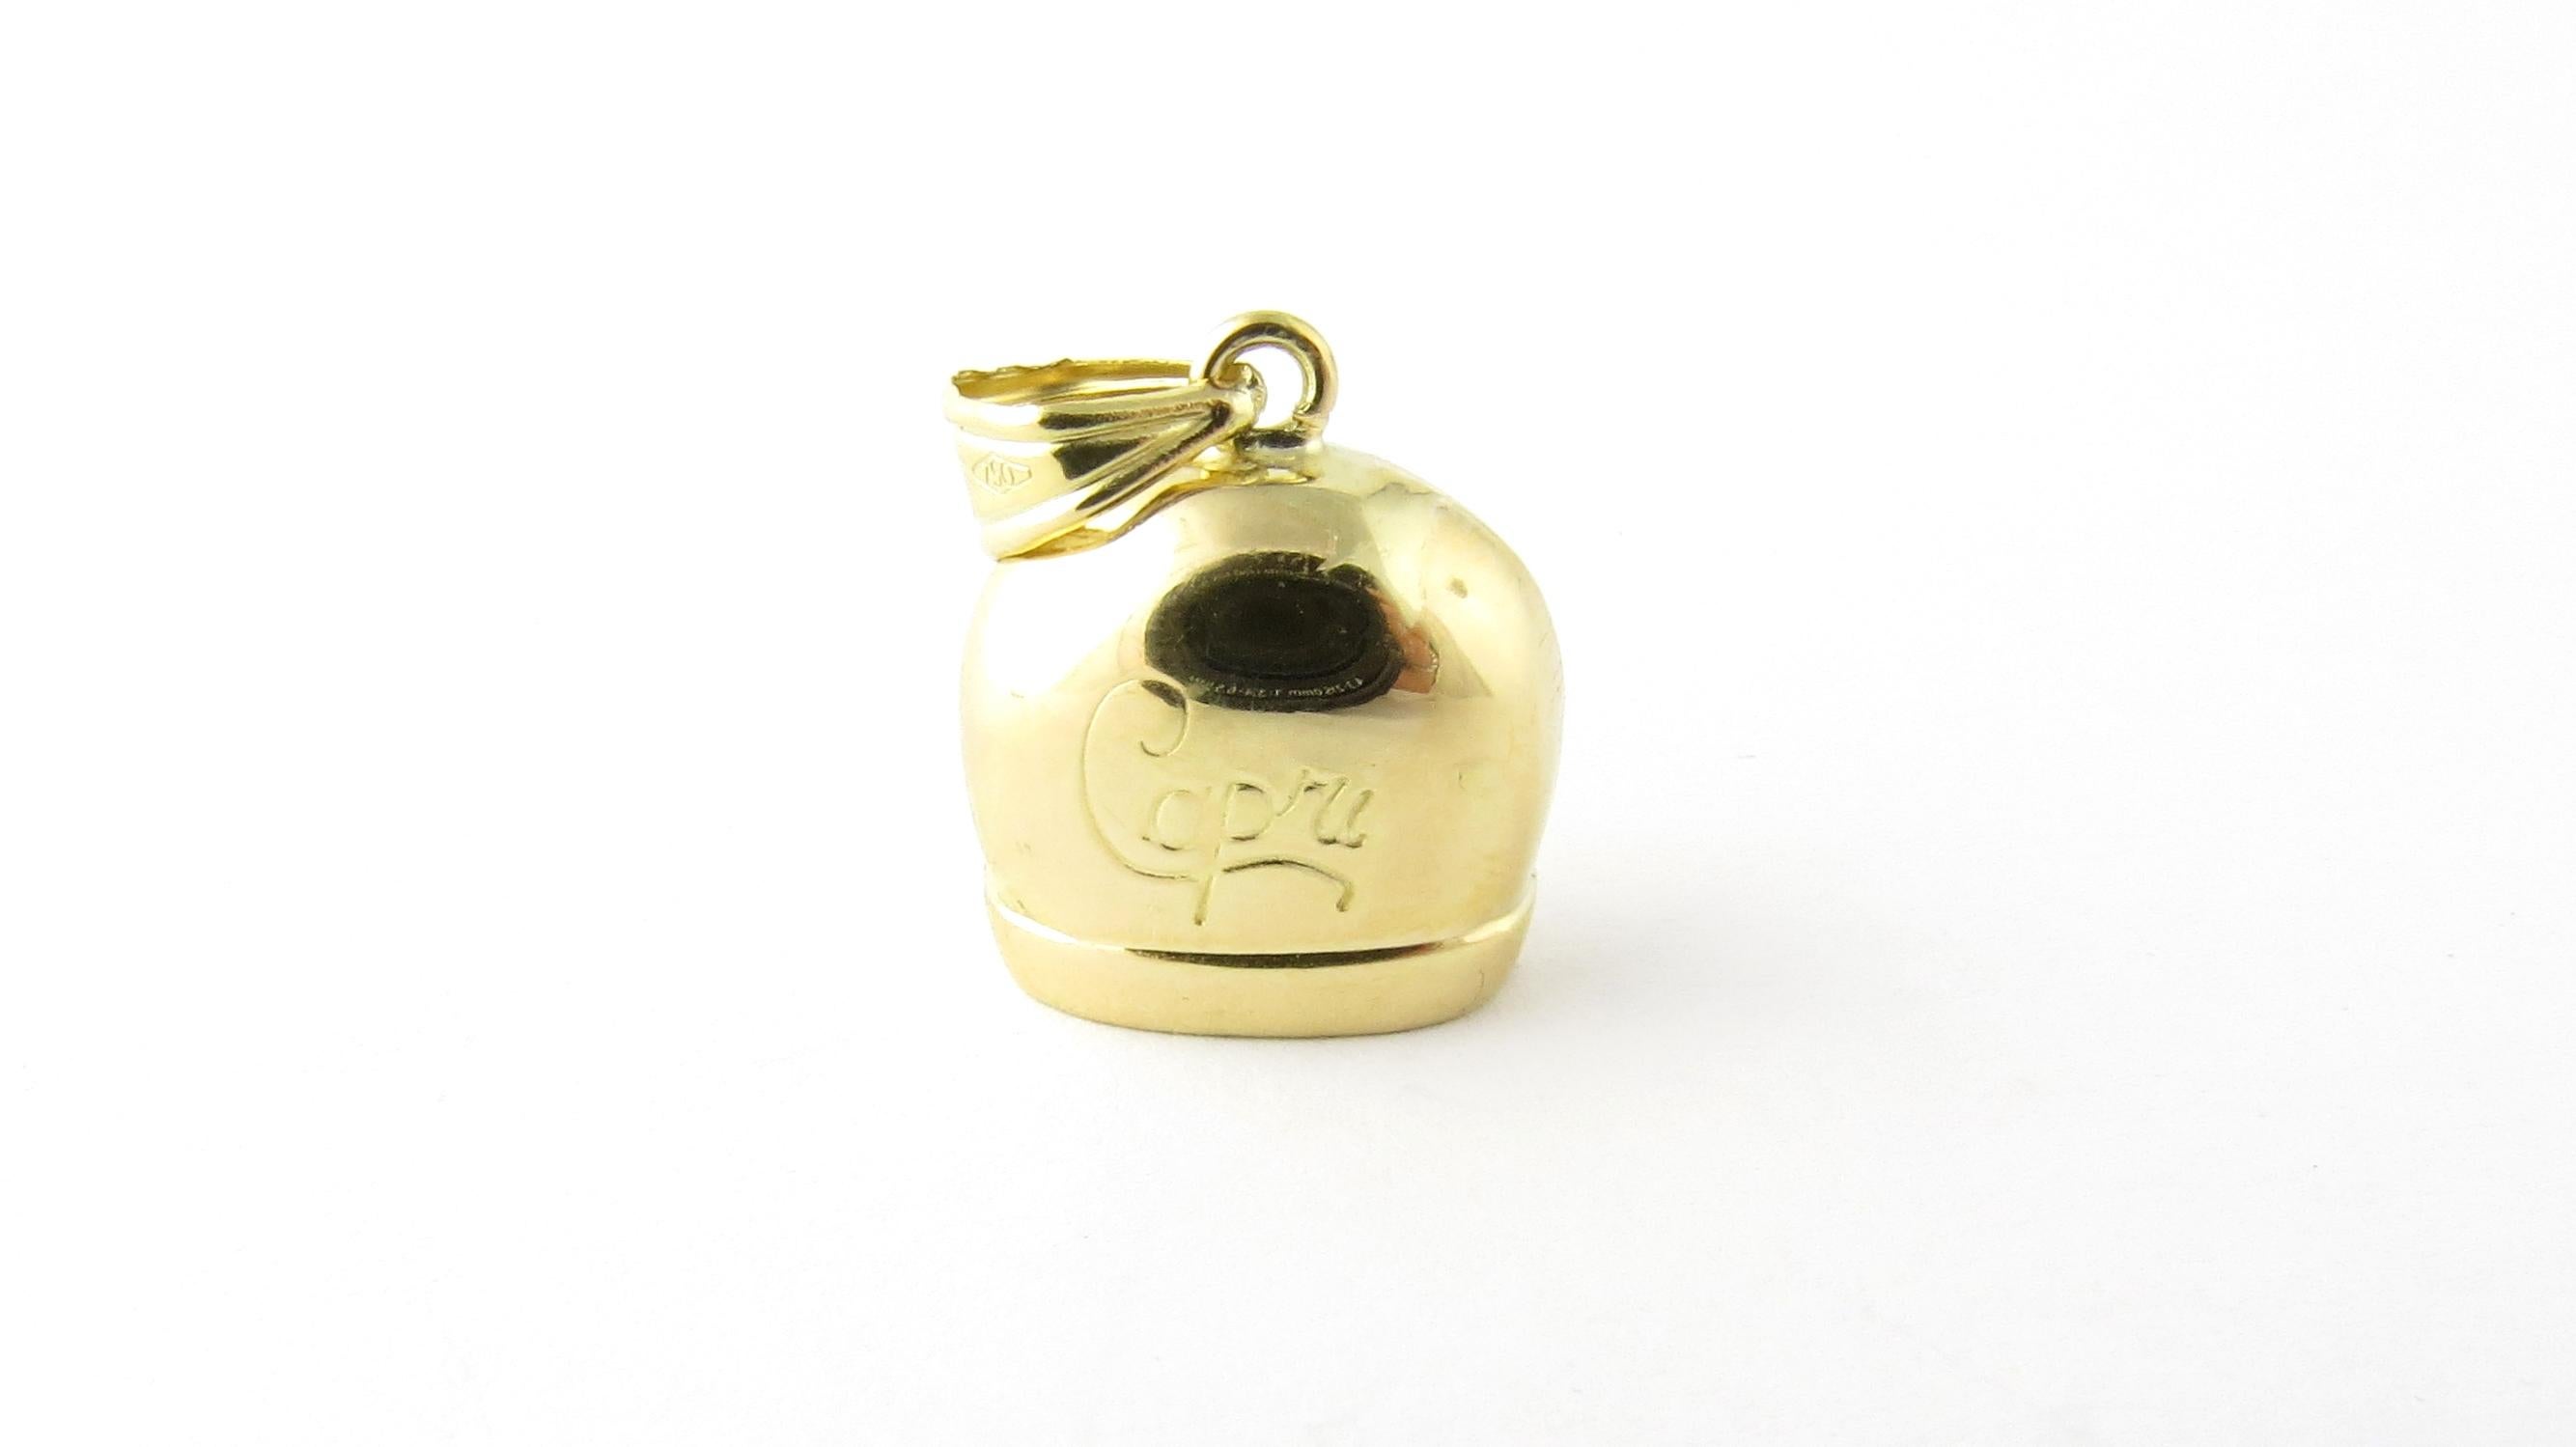 Vintage 18 Karat Yellow Gold Capri Cowbell Charm.

Commemorate that special trip to Capri!

This lovely 3D bell with working clapper is beautifully detailed in 18K yellow gold. 